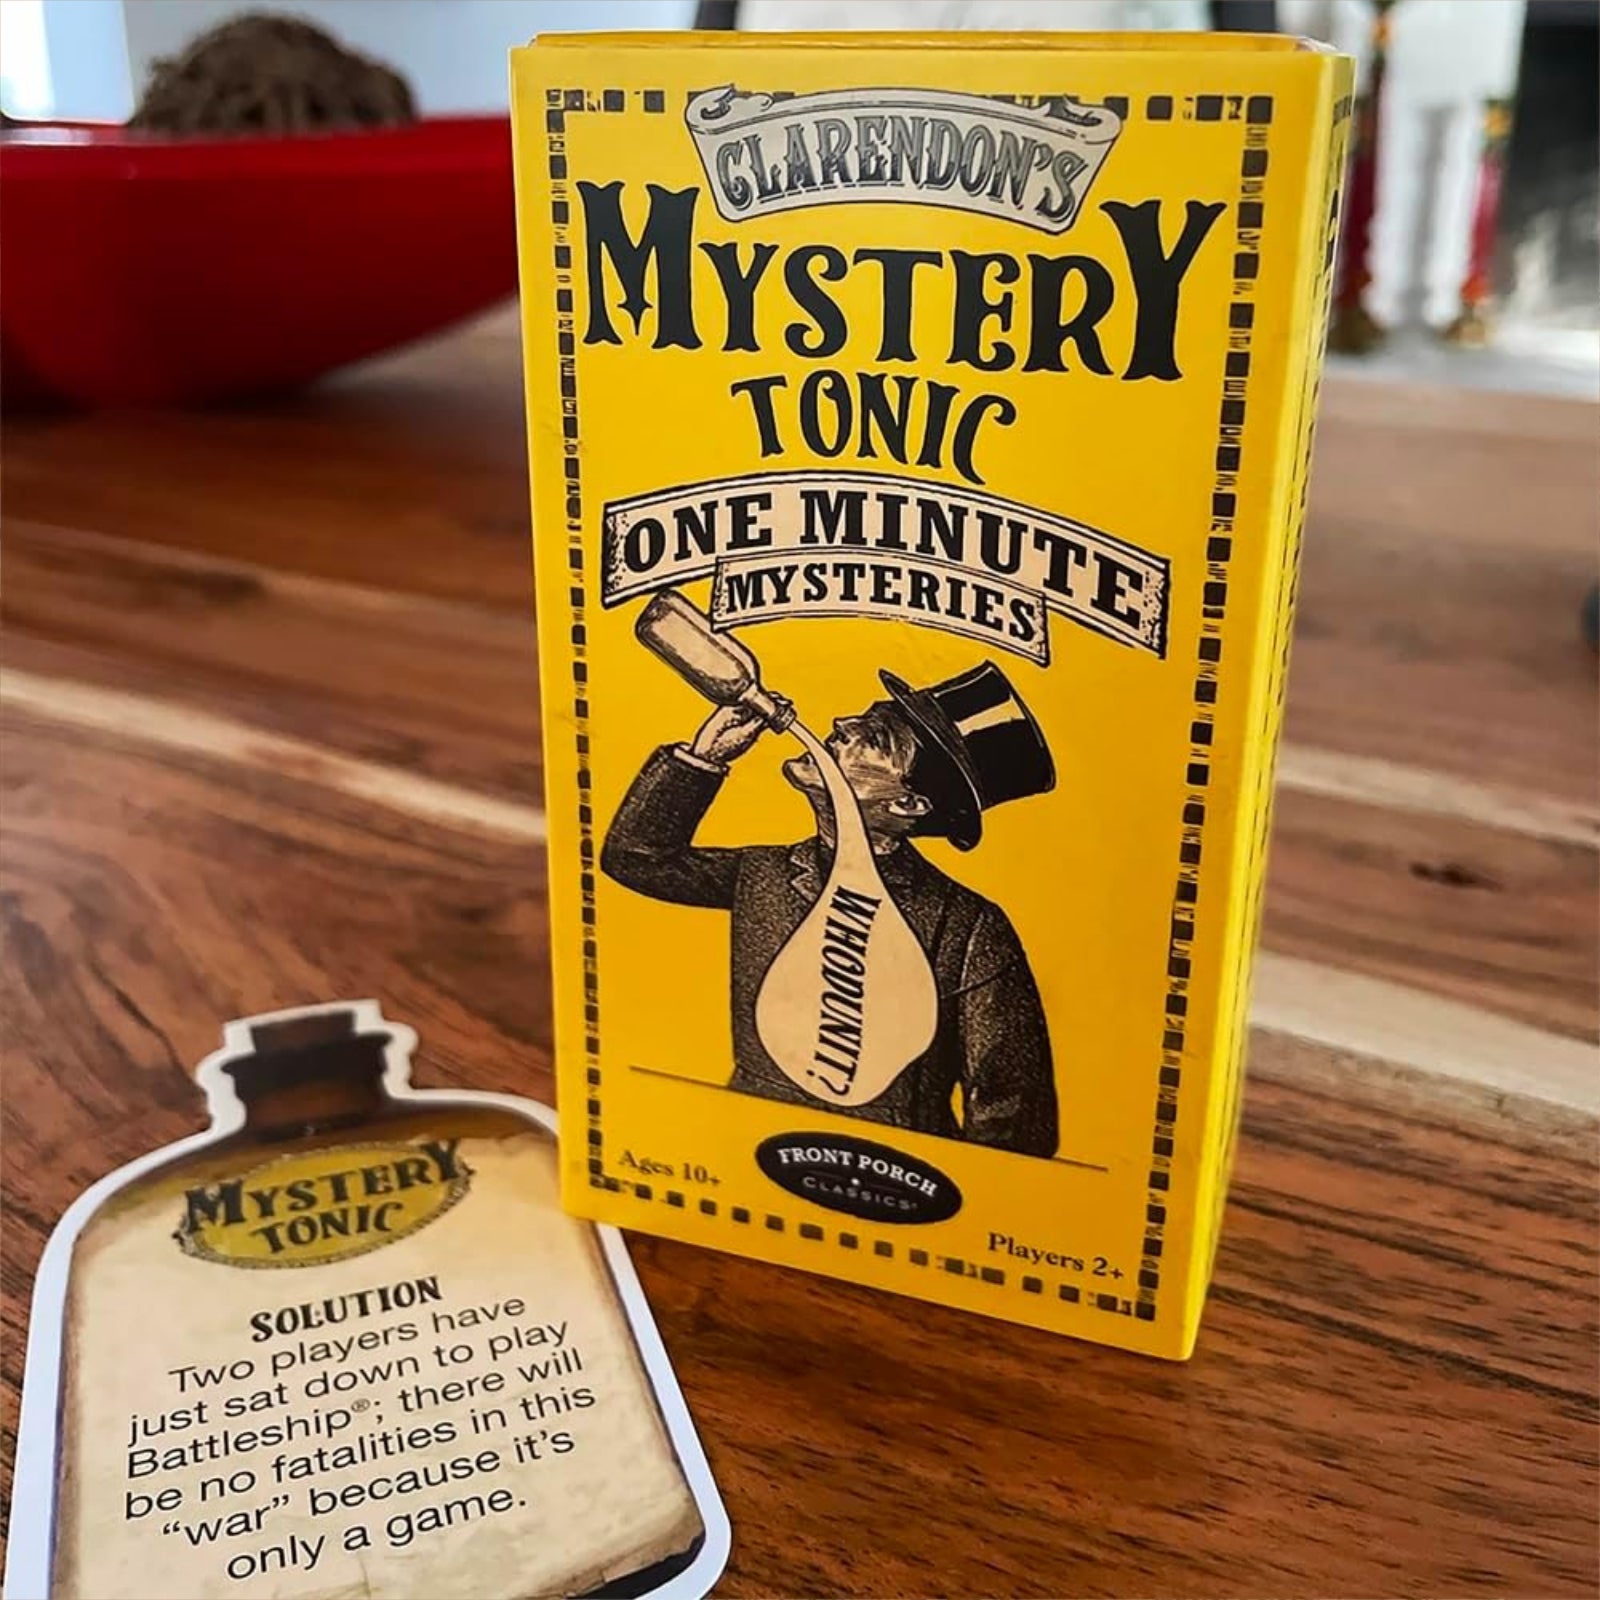 Claredon's Mystery Tonic - One Minute Mysteries